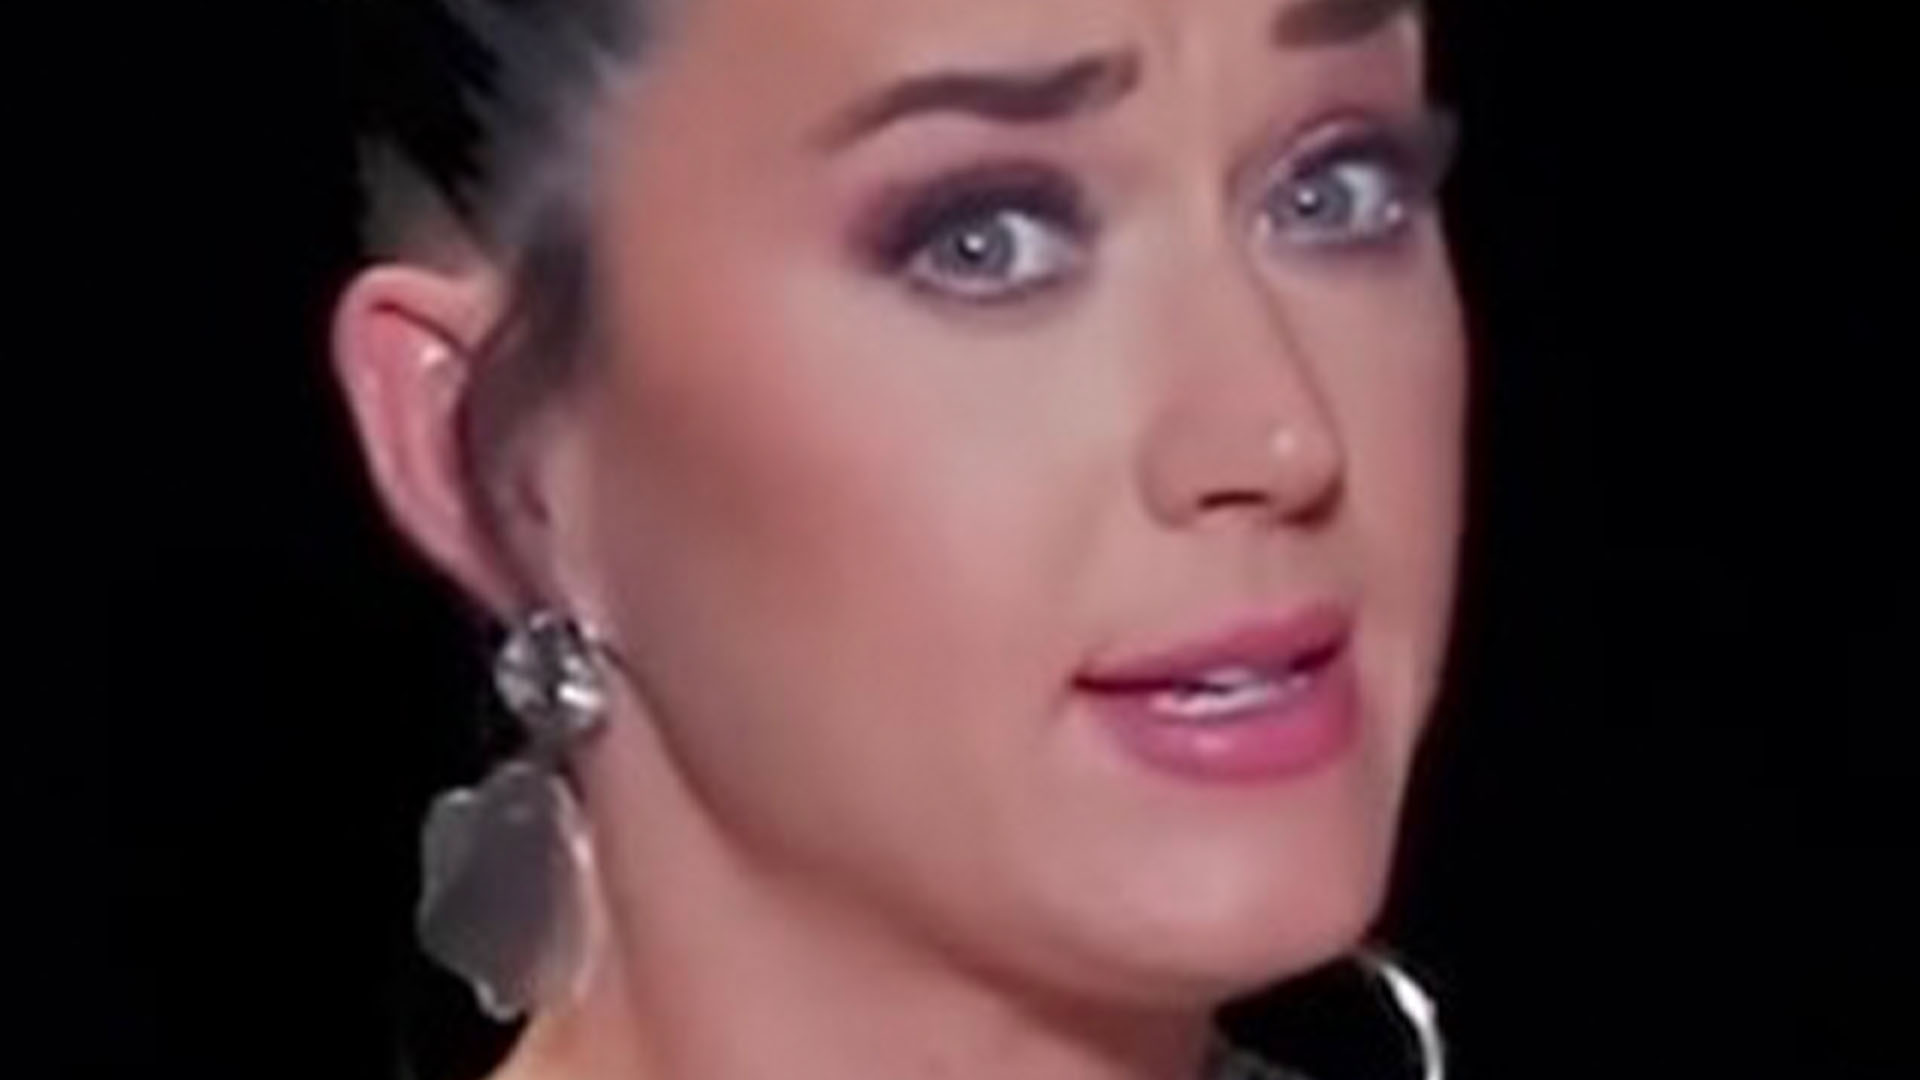 Katy Perry Discreetly Hides ‘Bump’ with Peppa Pig – Fans Spot Clue in Studio!